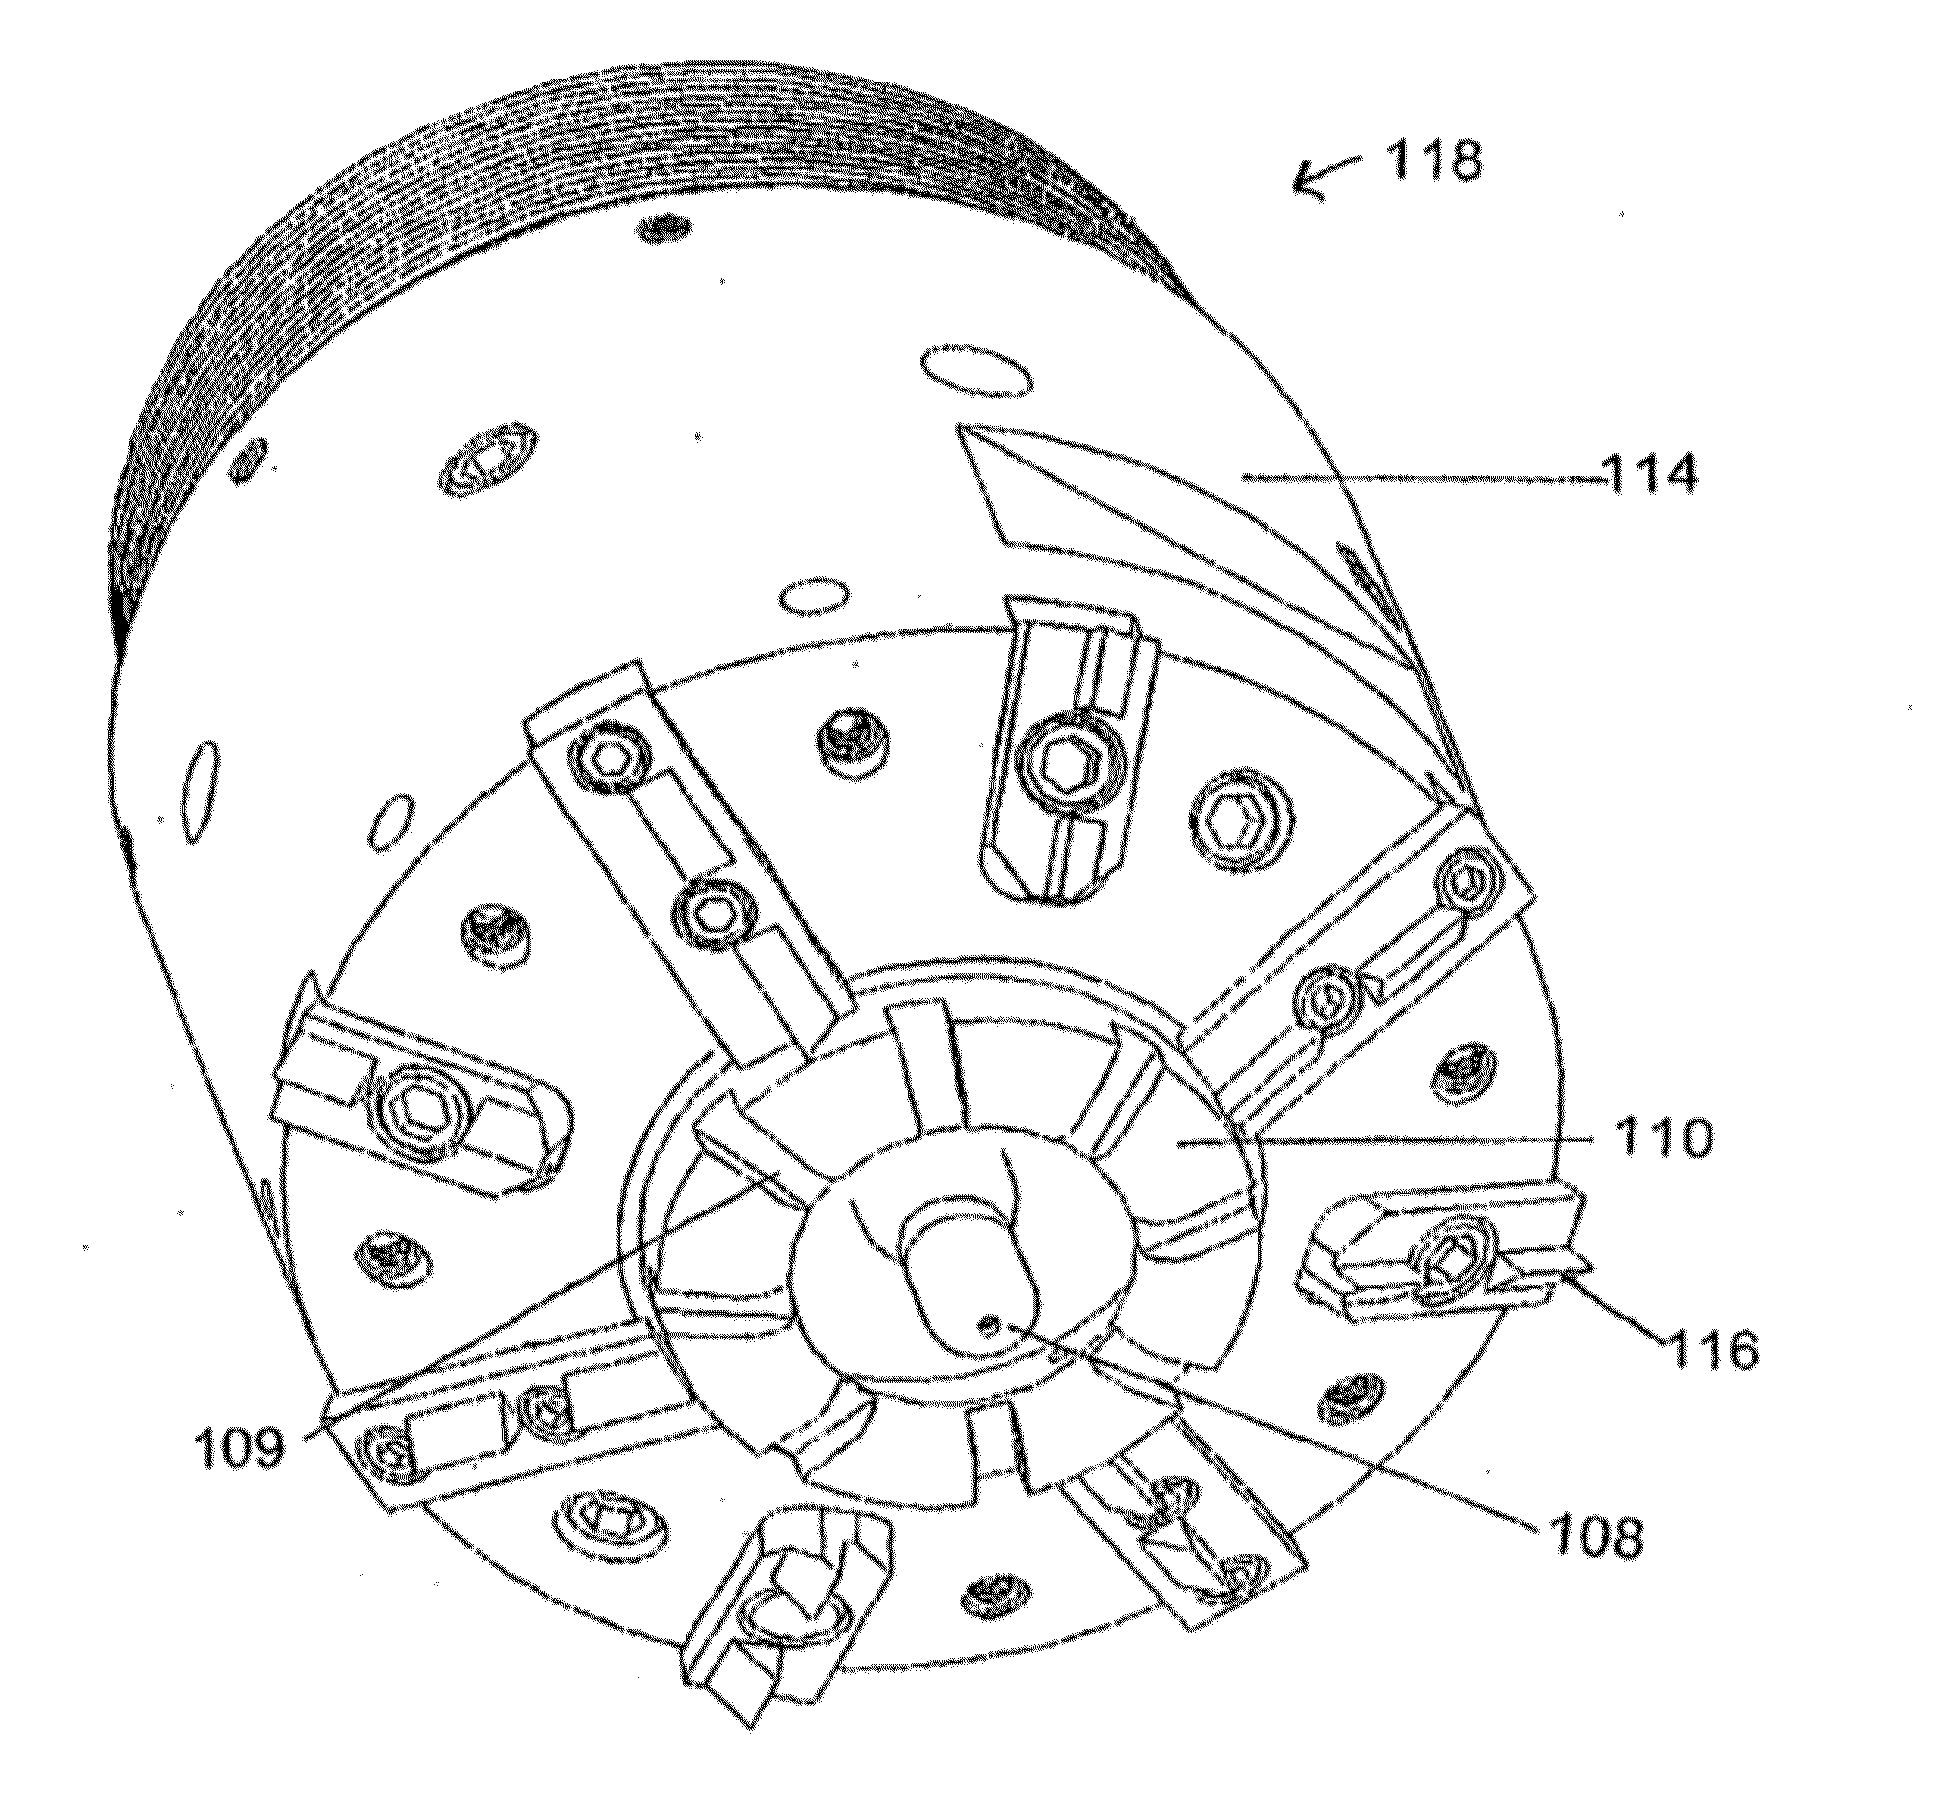 Apparatus and Method for Supplying Electrical Power to an Electrocrushing Drill